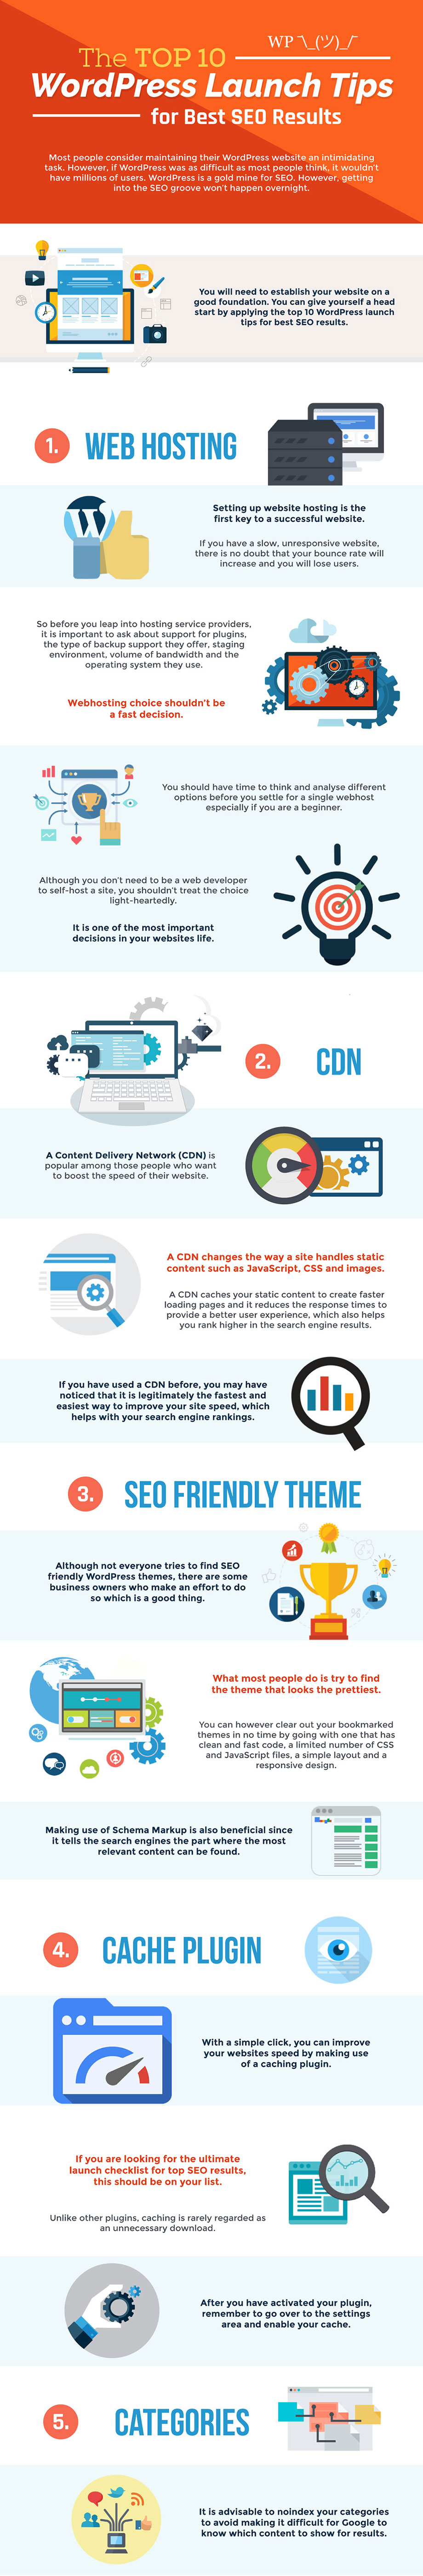 Top 10 WordPress Launch Tips for Best SEO Results (Infographic) - 1